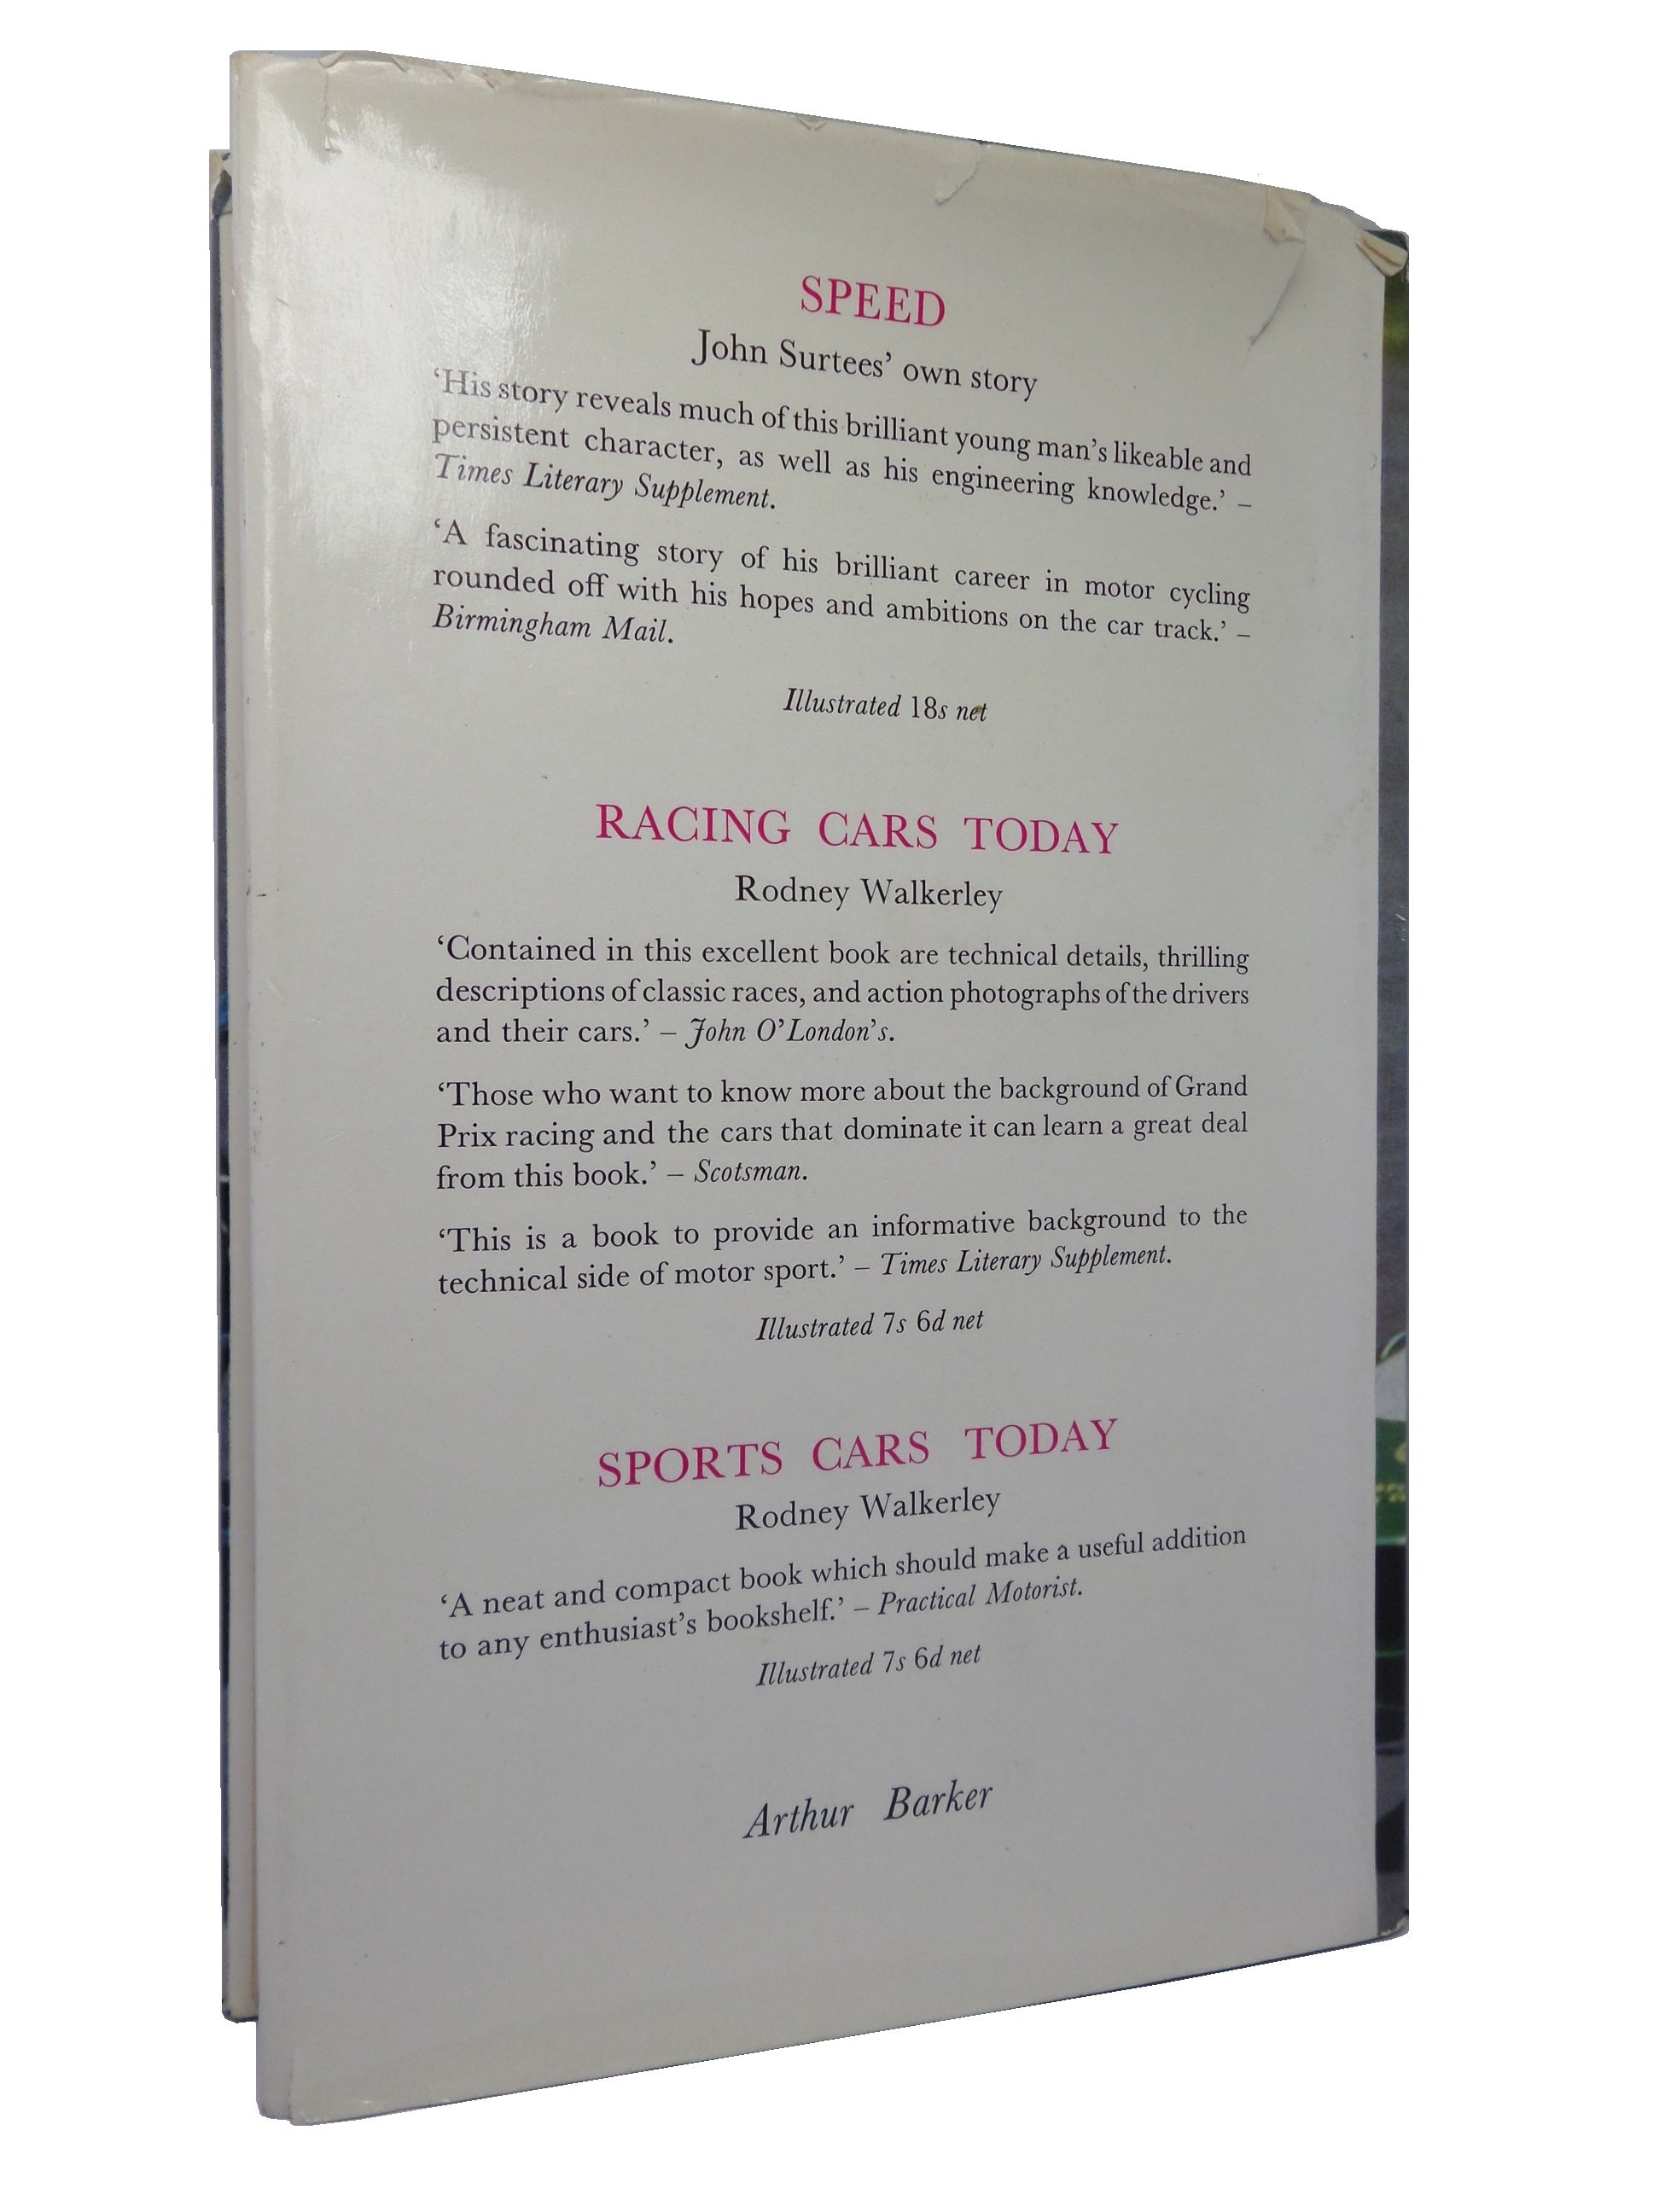 JIM CLARK AT THE WHEEL 1964 SIGNED FIRST EDITION HARDBACK